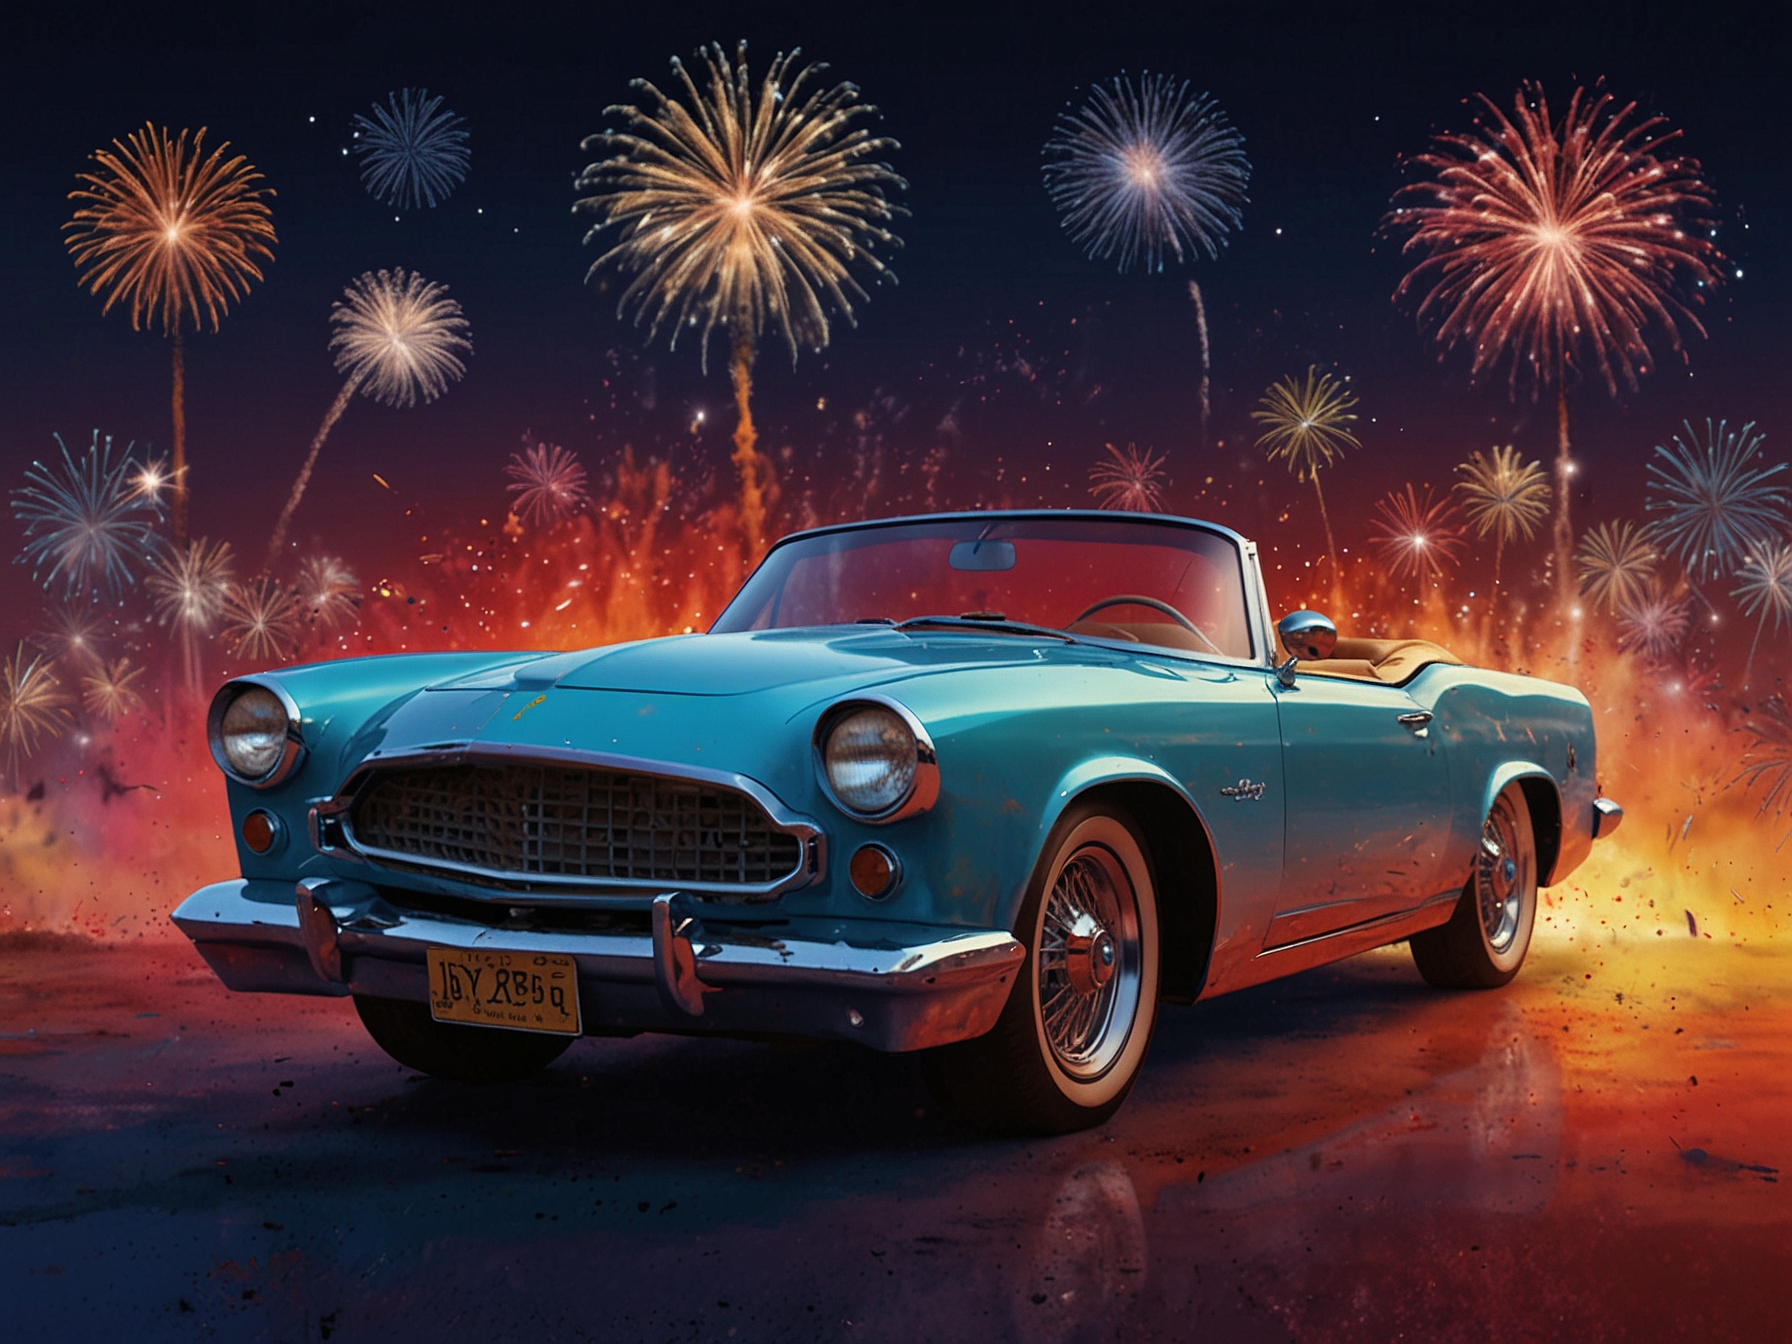 A vibrant promotional poster for 'Joy Ride,' featuring Kesha in a colorful, celebratory setting with fireworks in the background, reflecting Independence Day and her personal liberation.